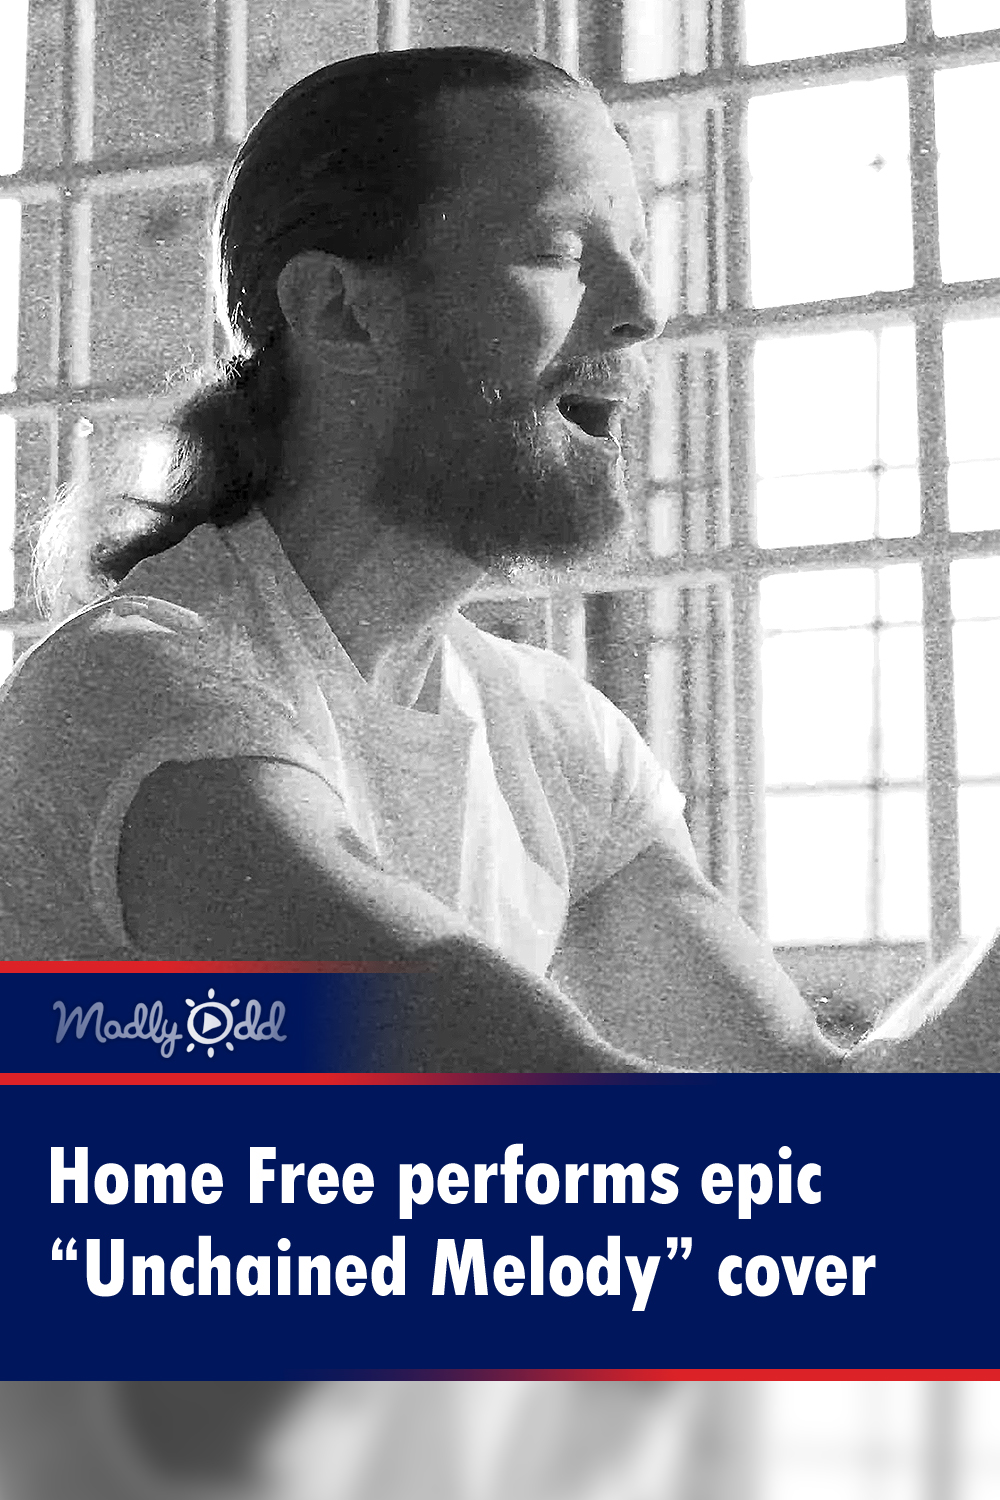 Home Free performs epic “Unchained Melody” cover